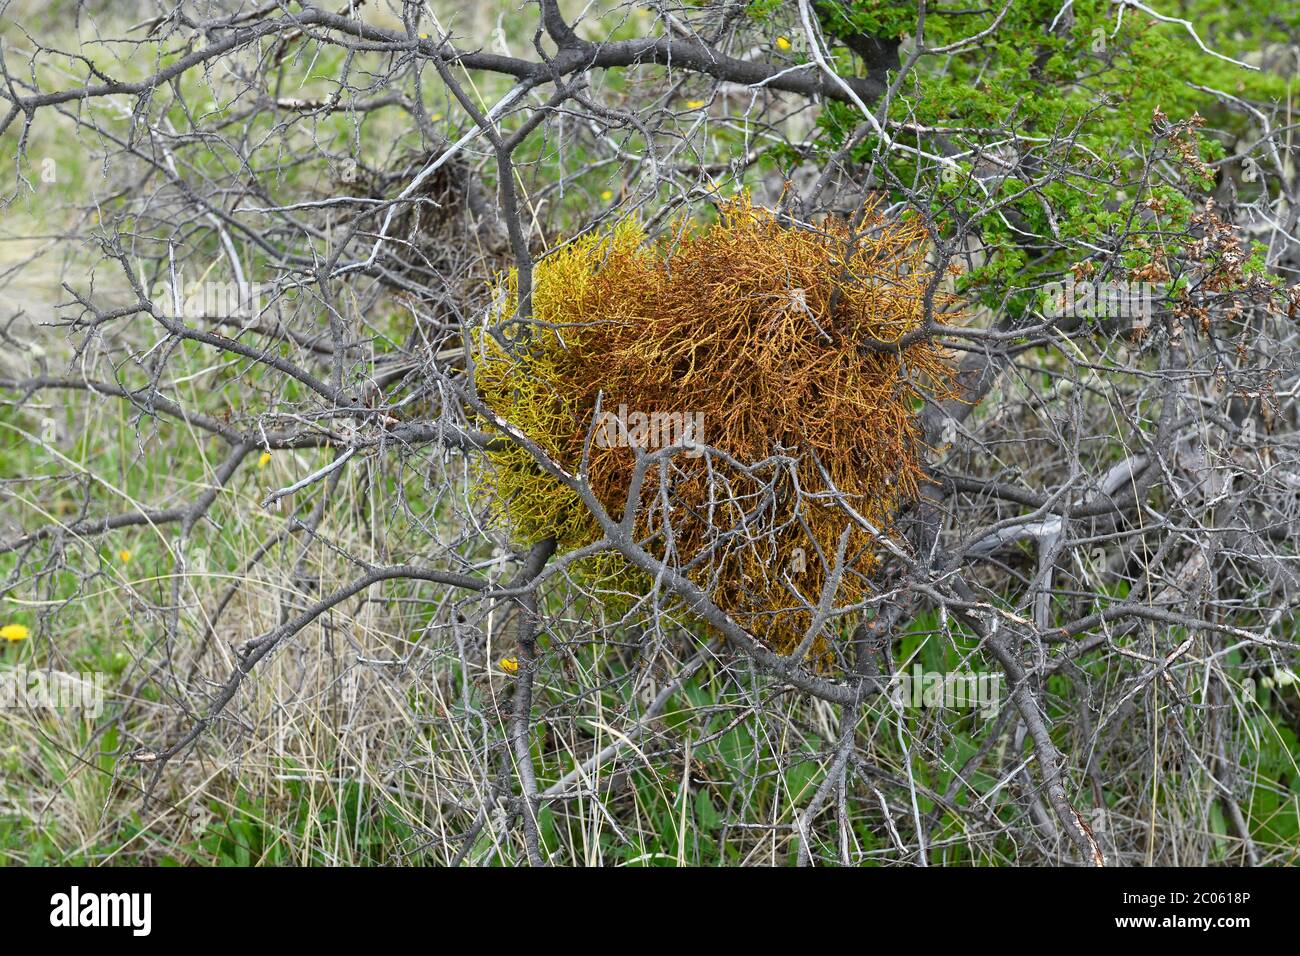 Orange colored lichen growing on a tree, Patagonia National Park, Chacabuco valley near Cochrane, Aysen Region, Patagonia, Chile Stock Photo